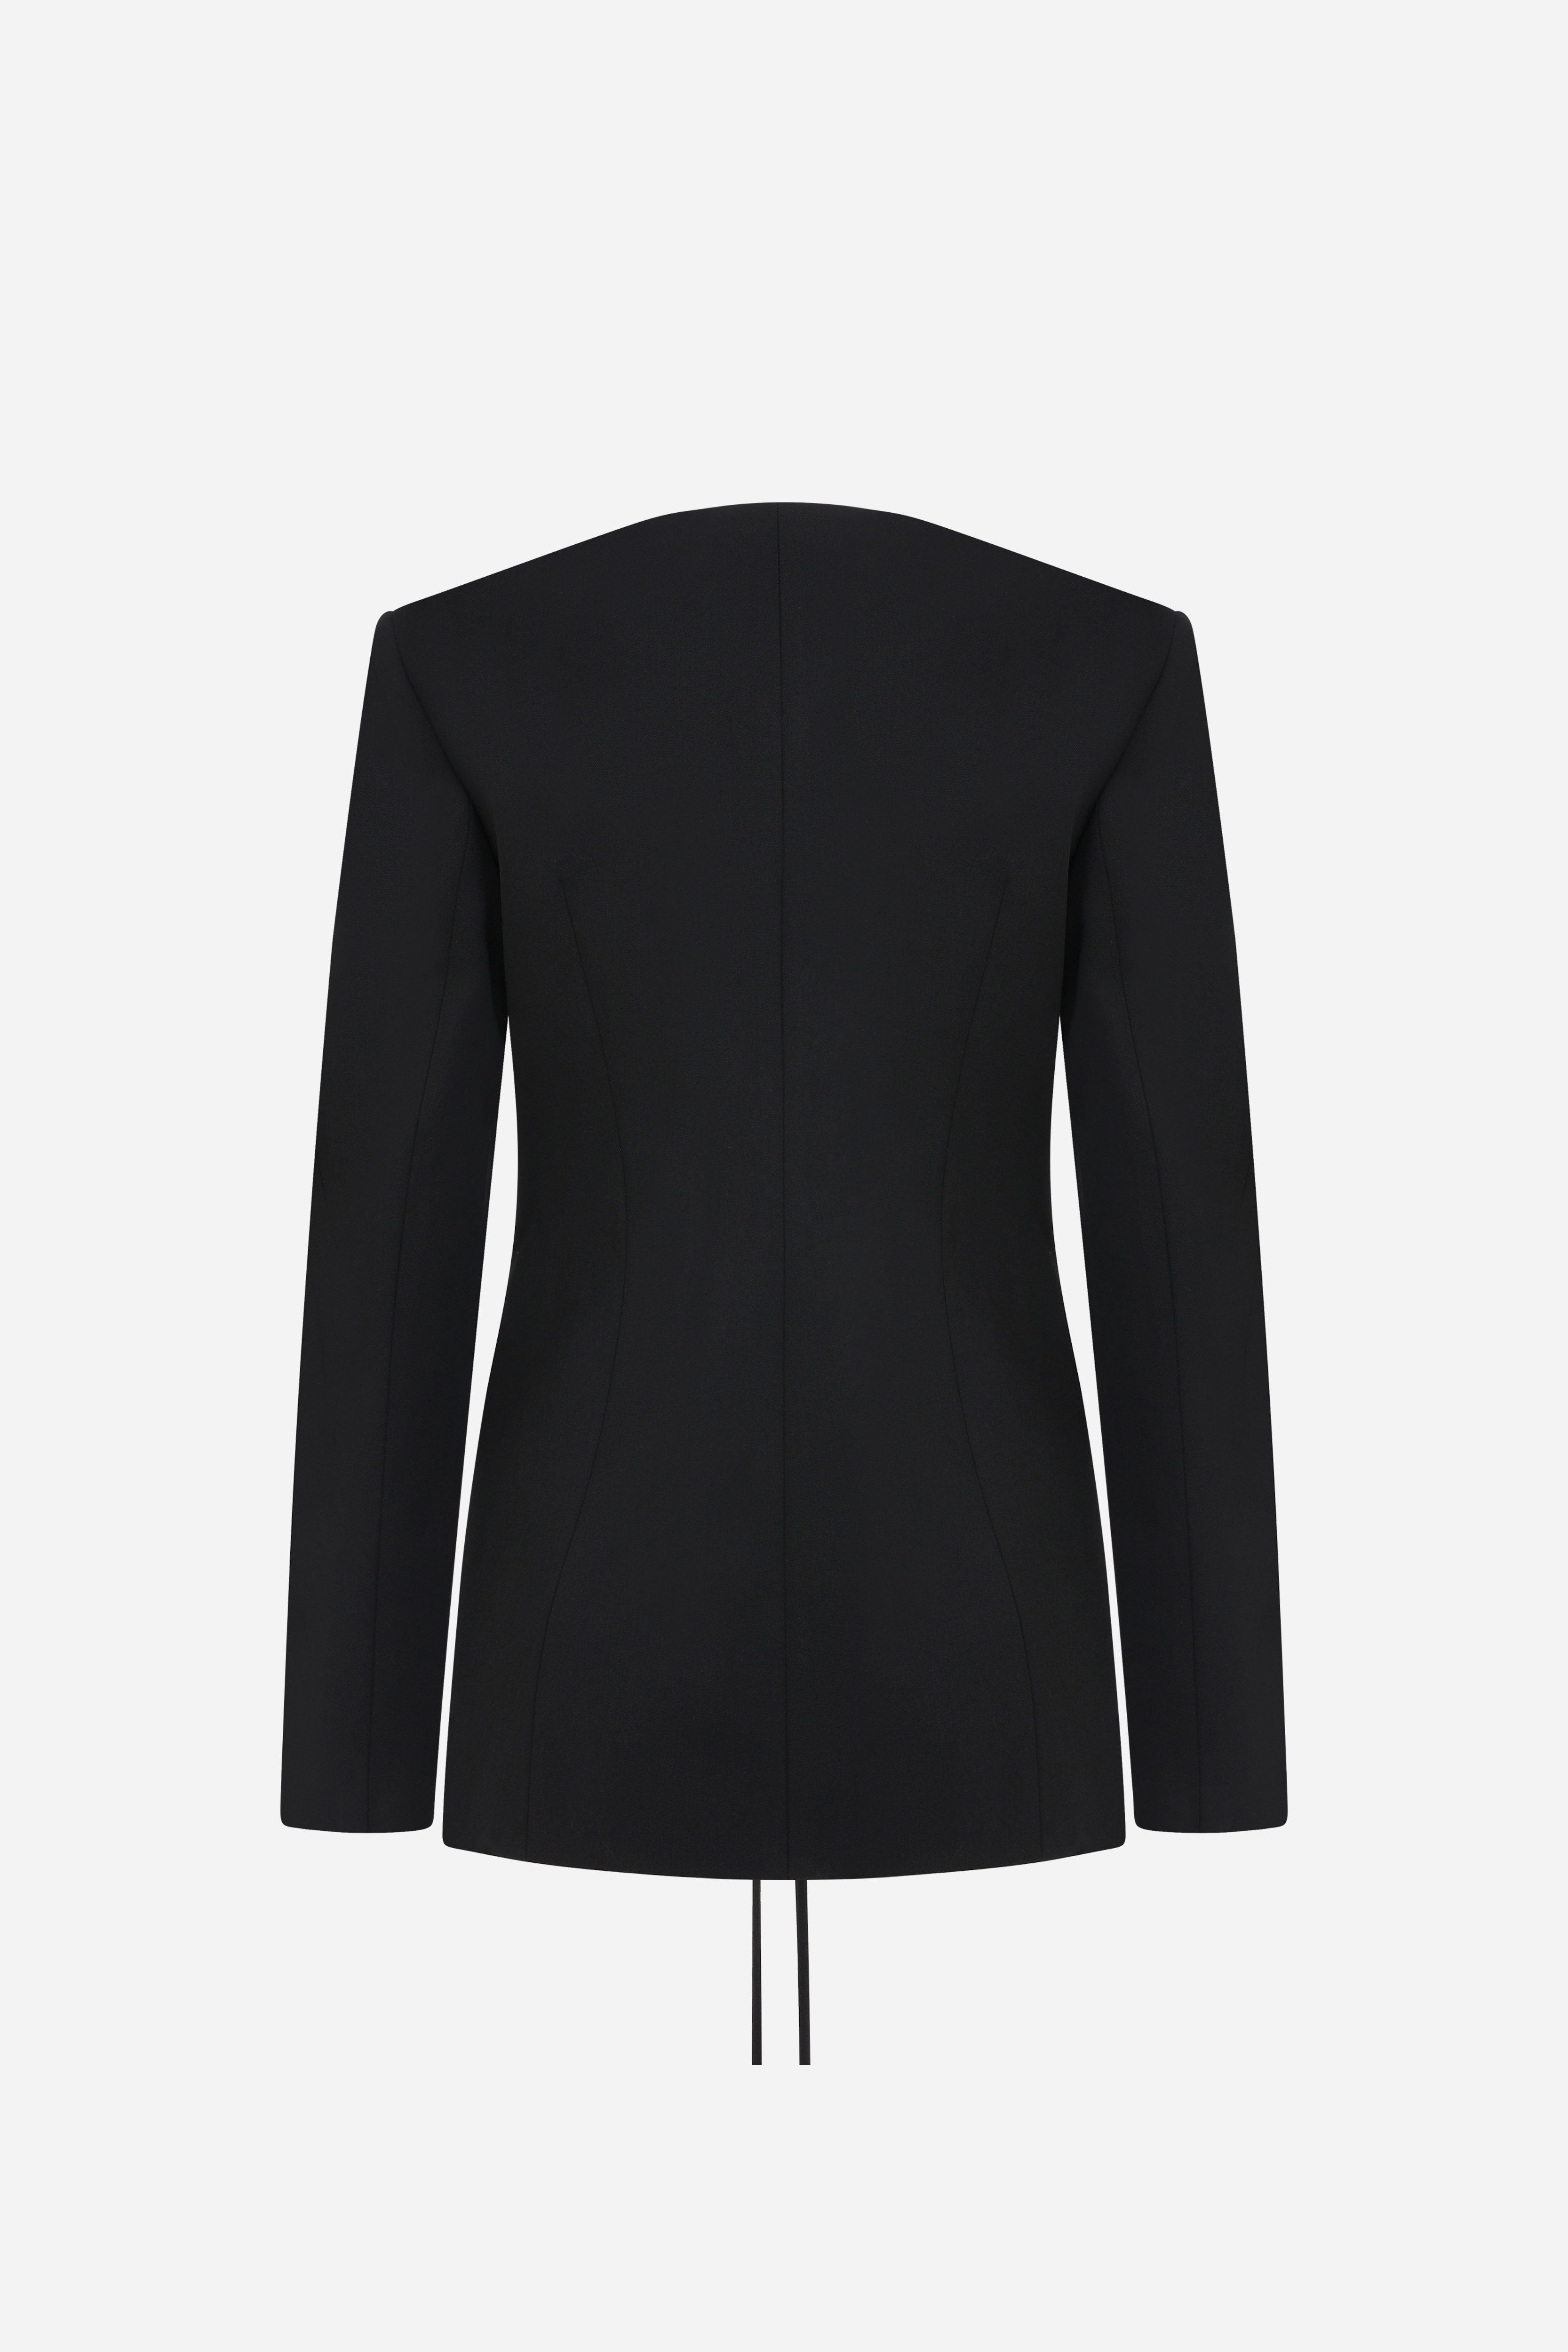 LINDA -BLAZER WITH CUTOUT DETAILS IN FRONT